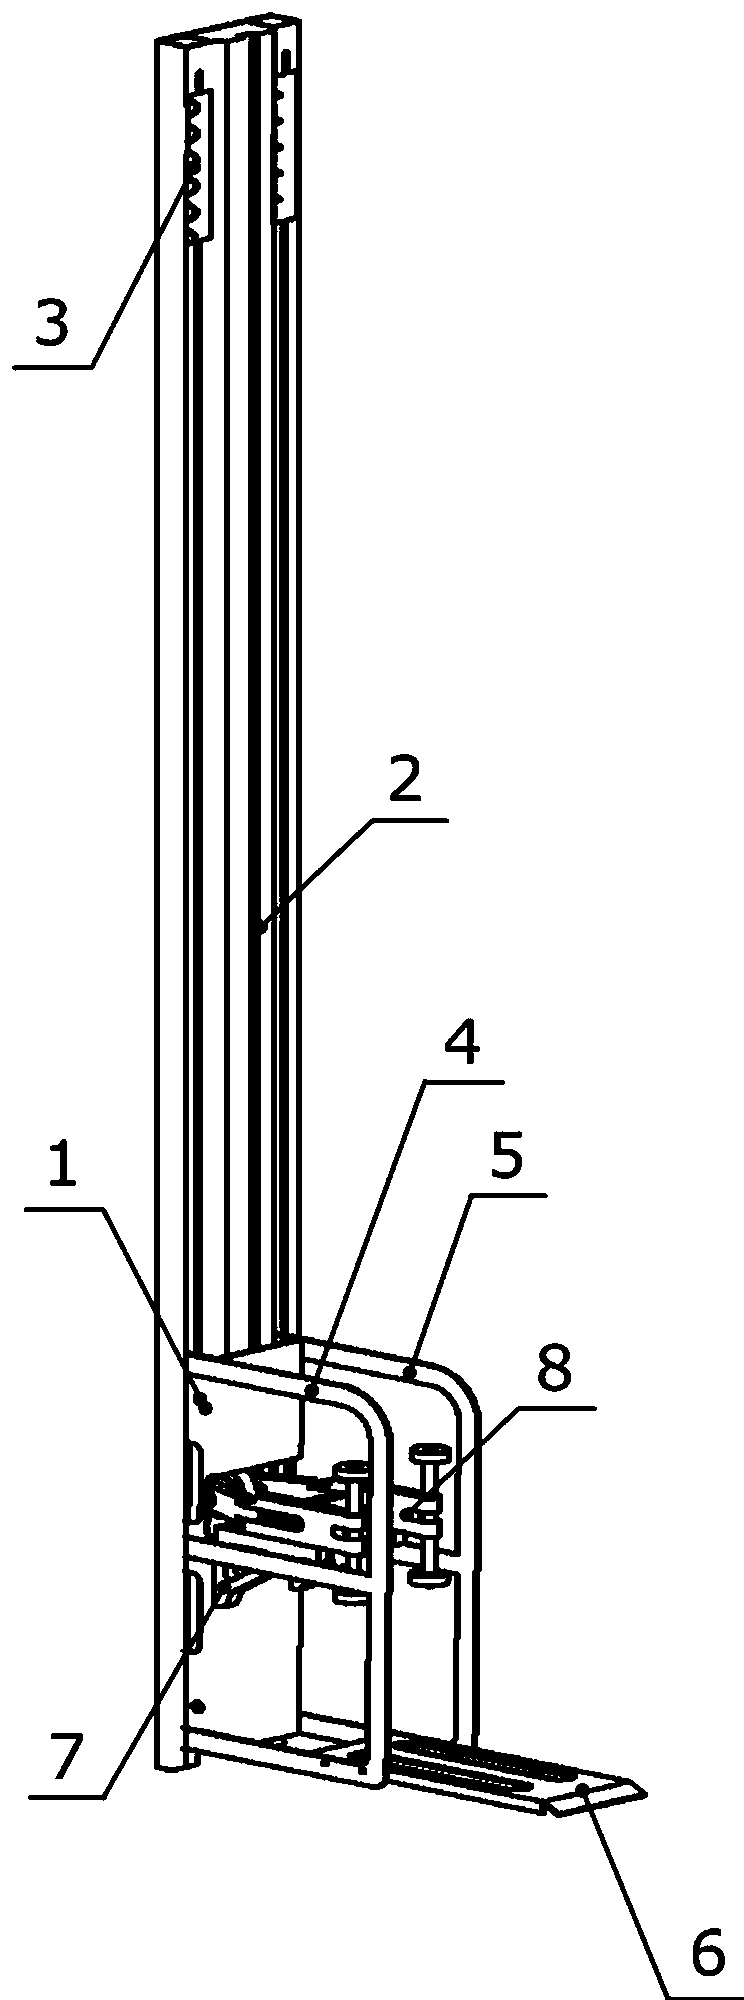 Modularized vertical abutting device for bicycle